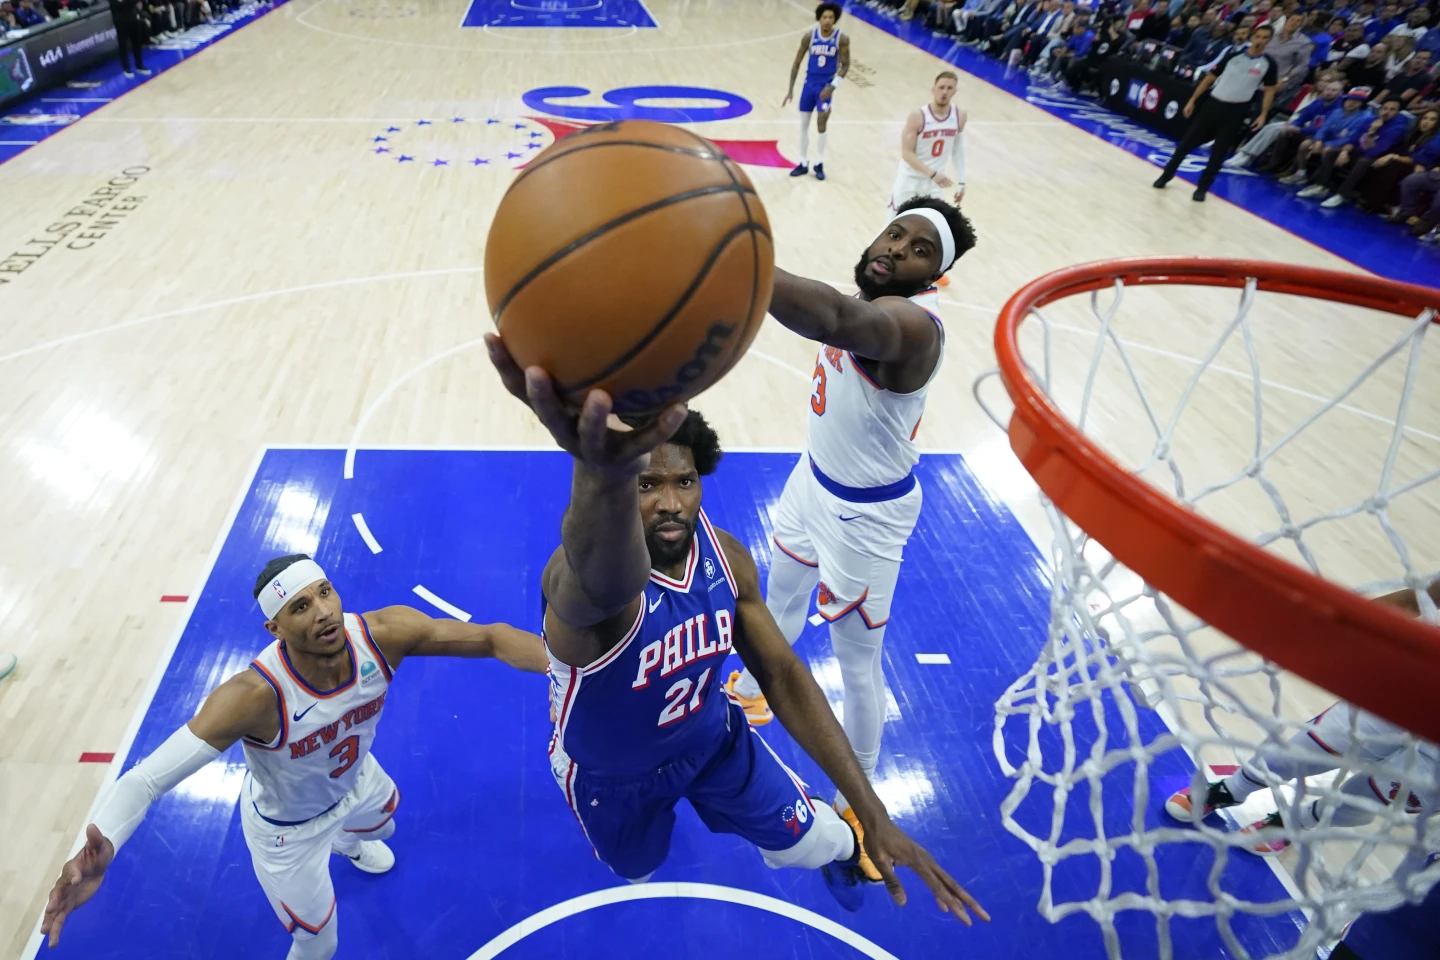 Joel Embiid Erupts for 50 points as Sixers Stave Off Knicks